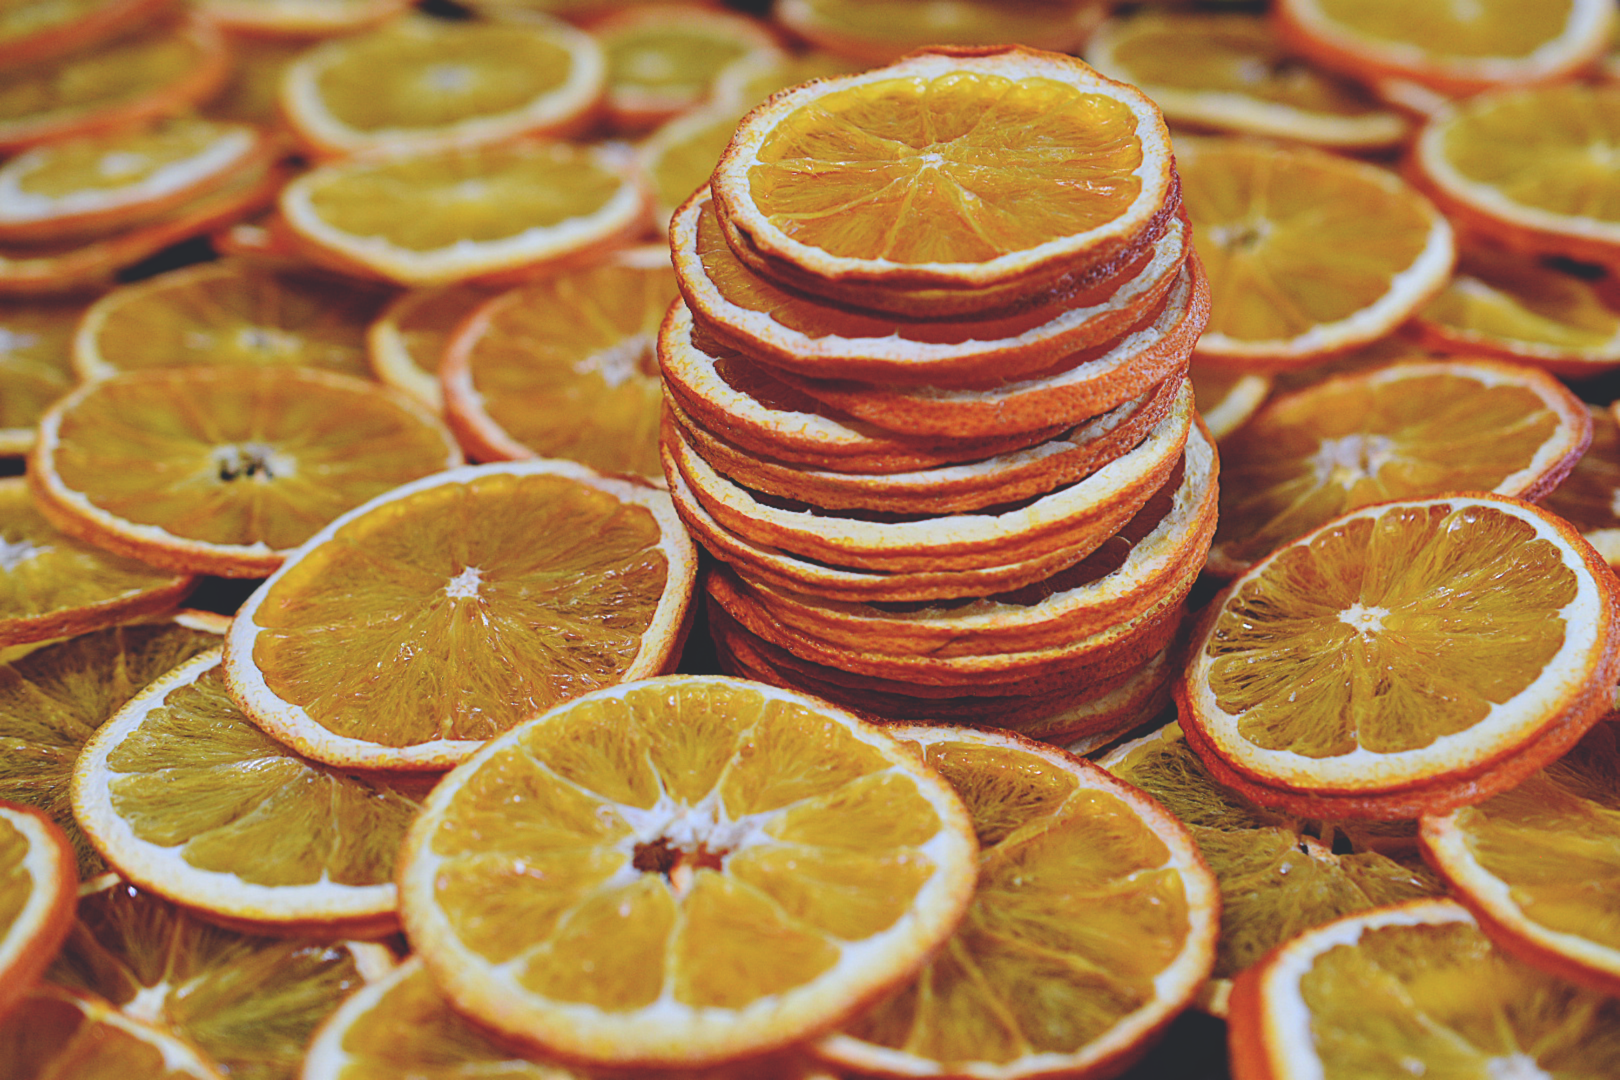 Many dried orange slices rests on a wooden surface. There is a stack of orange slices in the middle. The orange slices are deep orange in color.